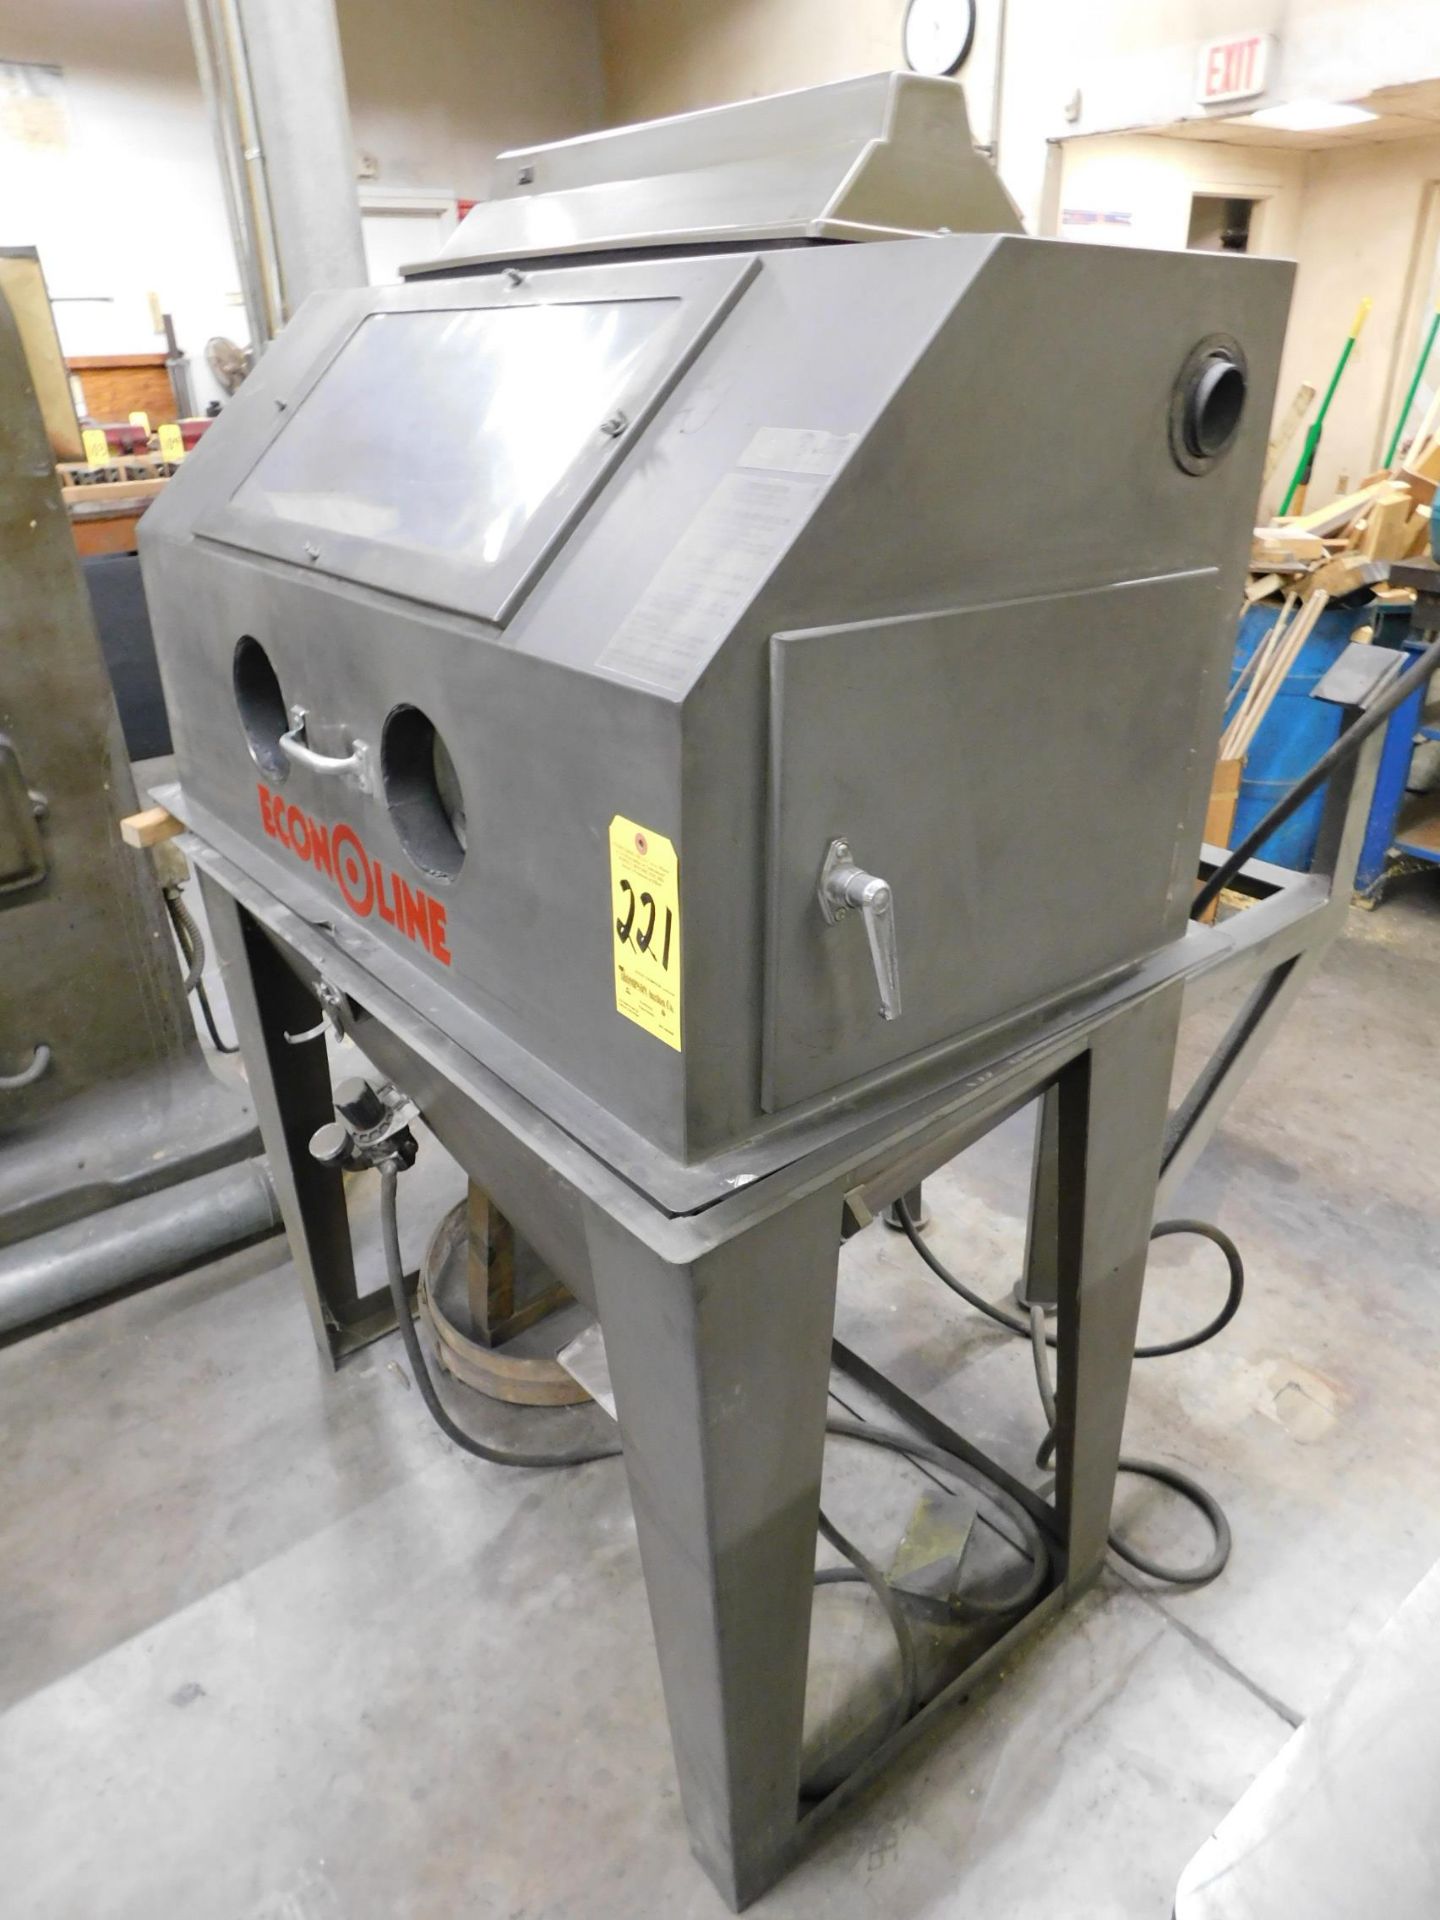 Econoline Clamshell Type Dry Blast Cabinet, 24" X 41" X 24" Inside Cabinet - Image 2 of 6